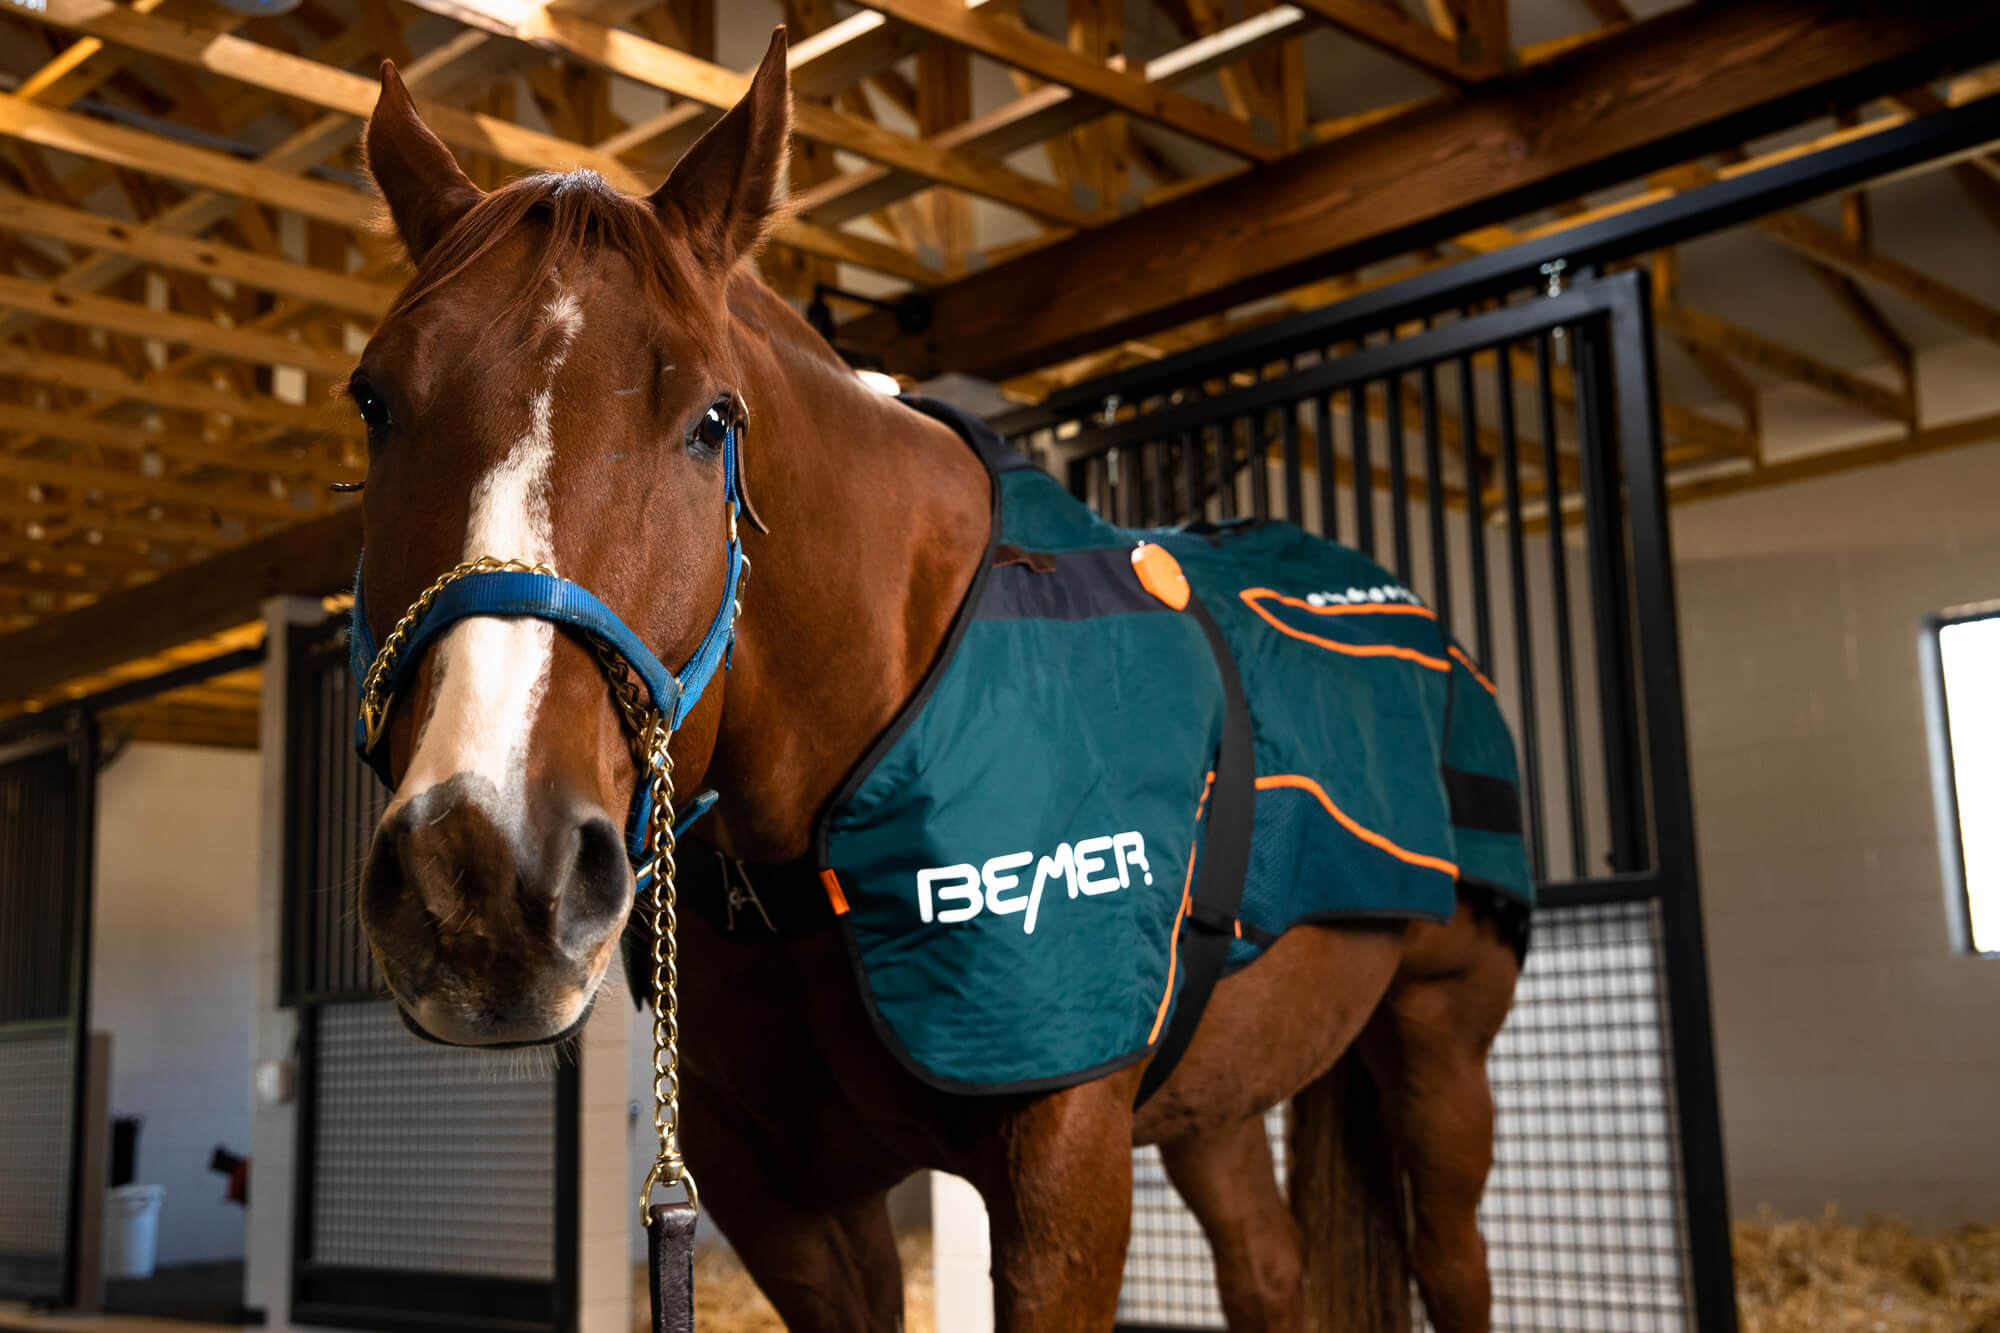 Bemer enhances suppleness, a prerequisite for motivation & willingness to learn, so your horse can exercise effectively.